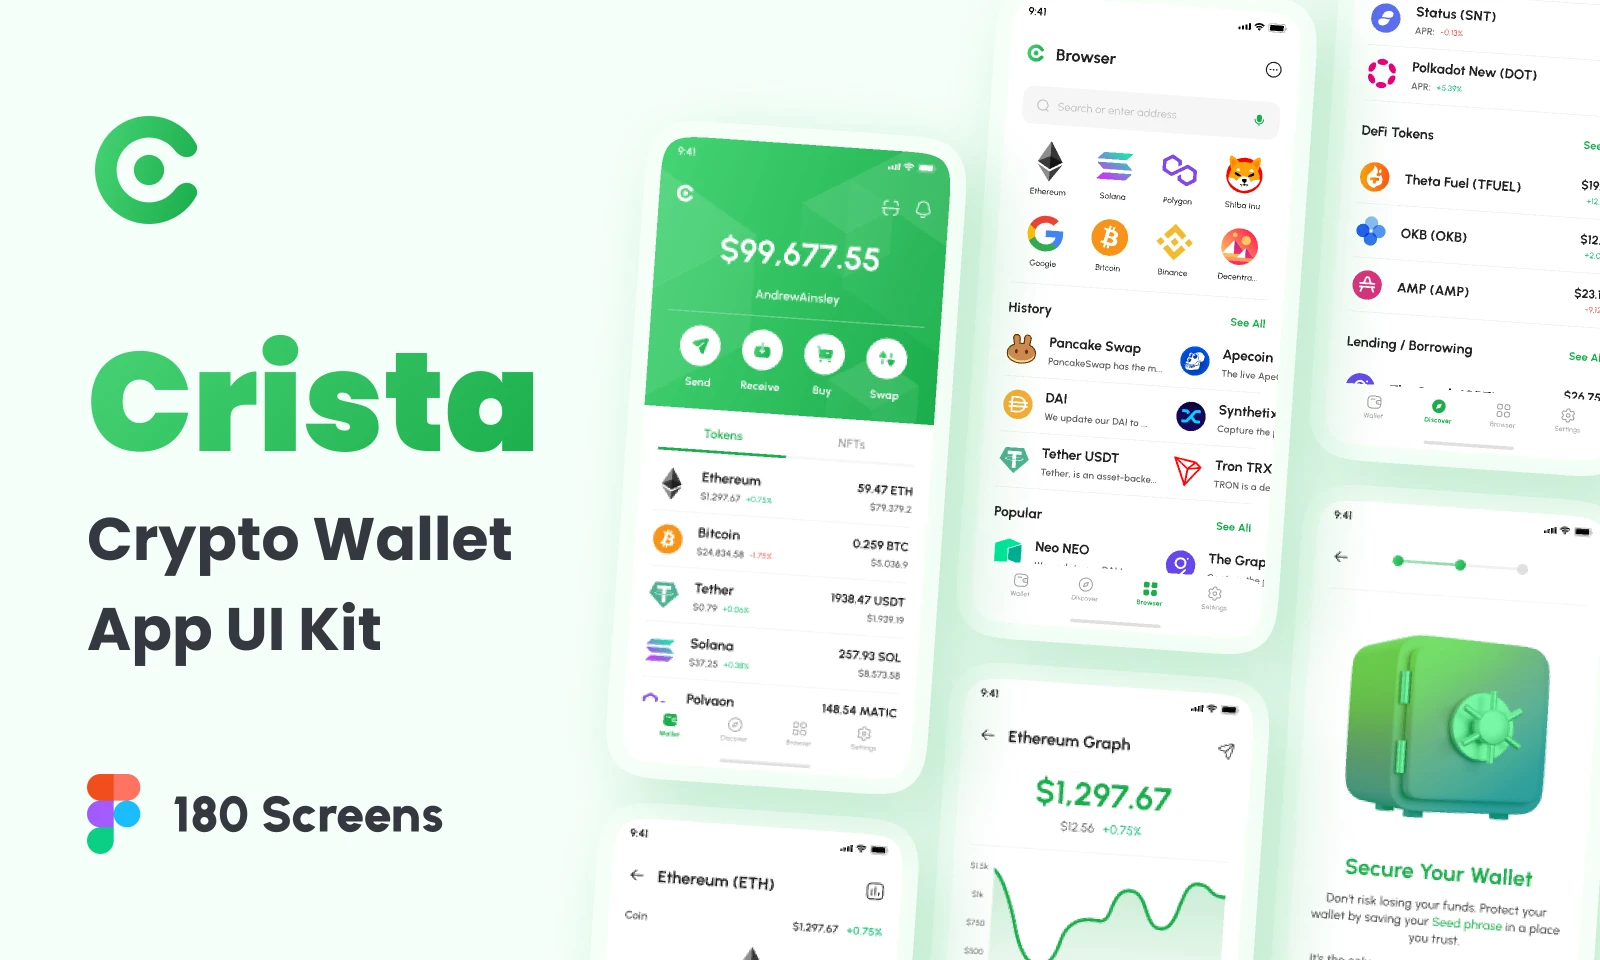 Crista - Crypto Wallet App UI Kit for Figma and Adobe XD